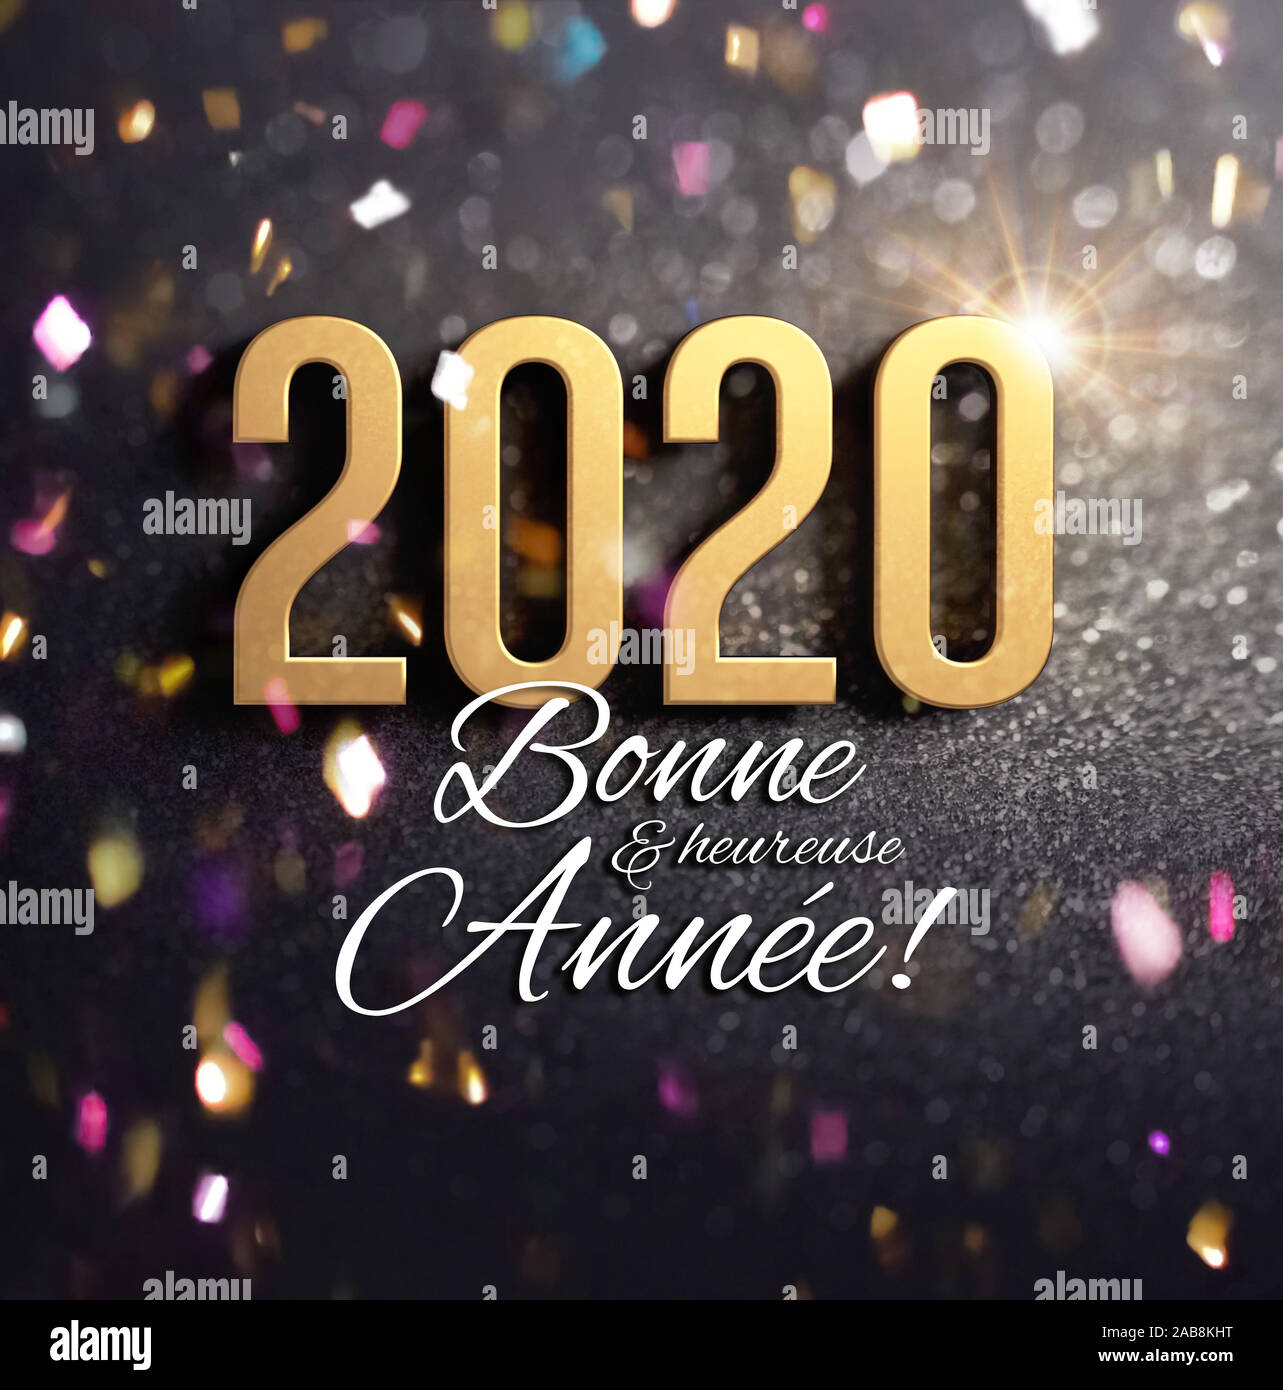 New Year date 2020 gold colored and Greetings in French language, on a festive black background, with glitters and confetti - 3D illustration Stock Photo